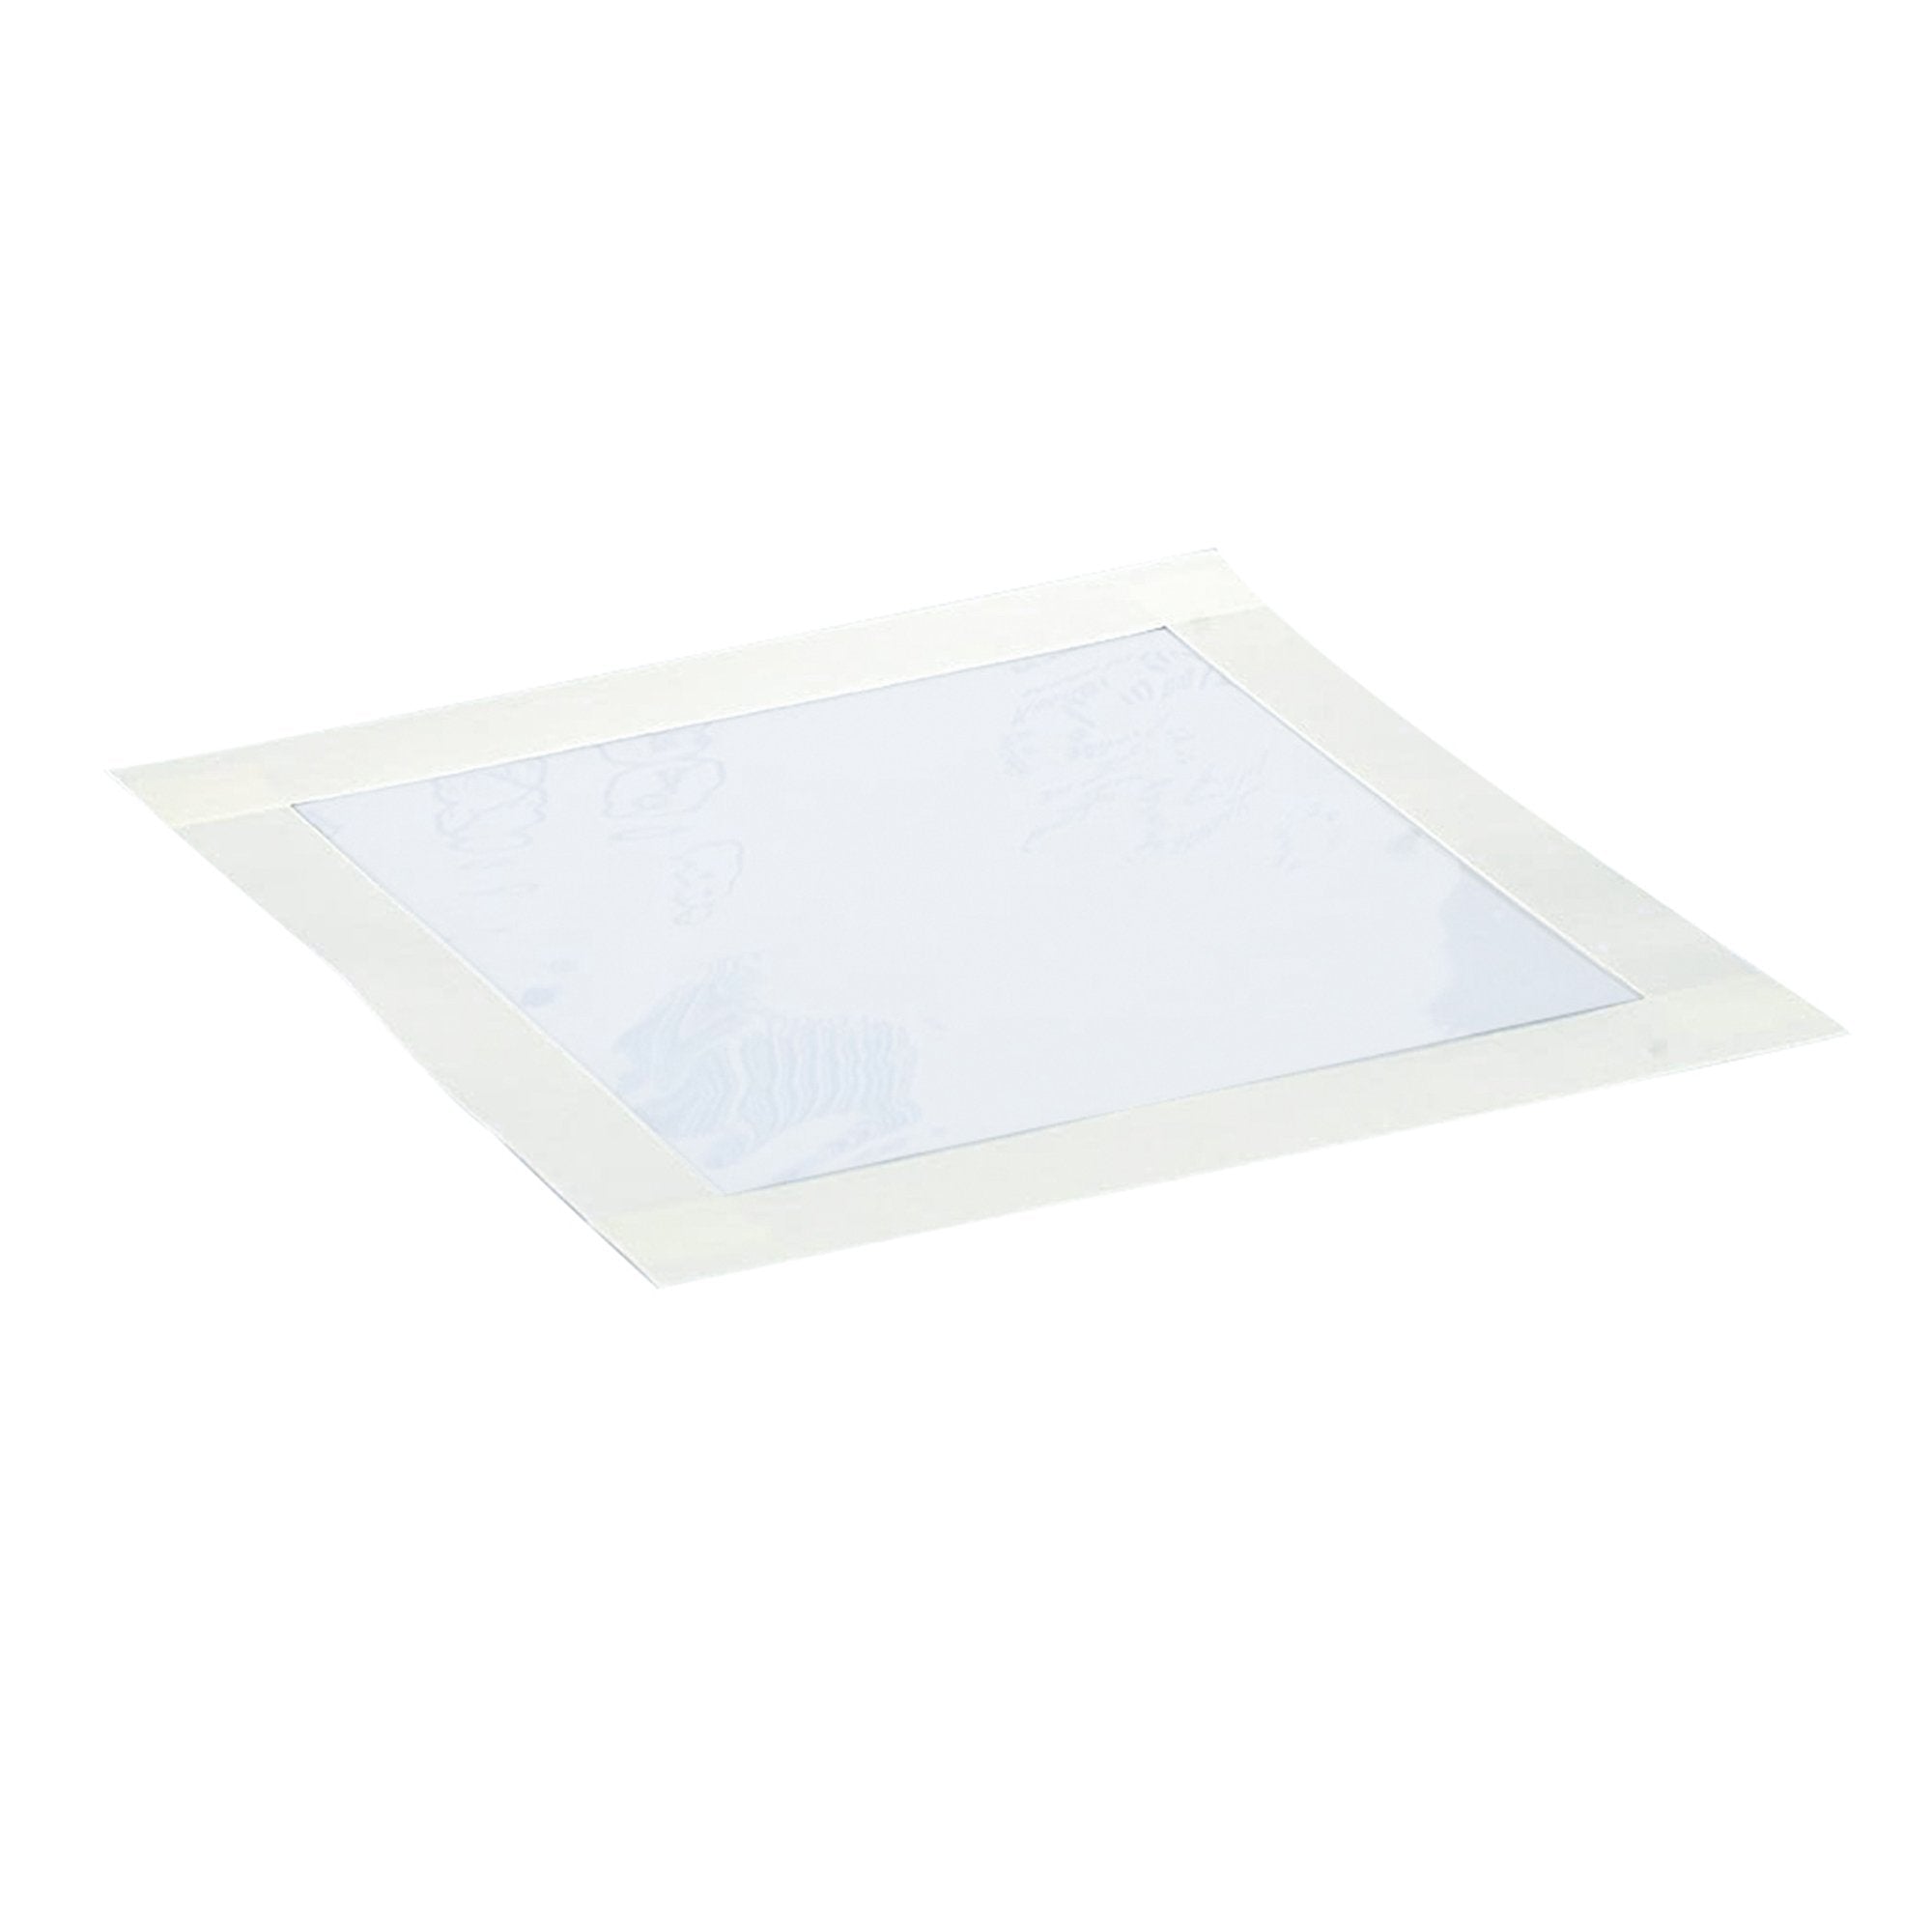 IV Site Barrier Protector HydroSeal 7 X 7 Inch